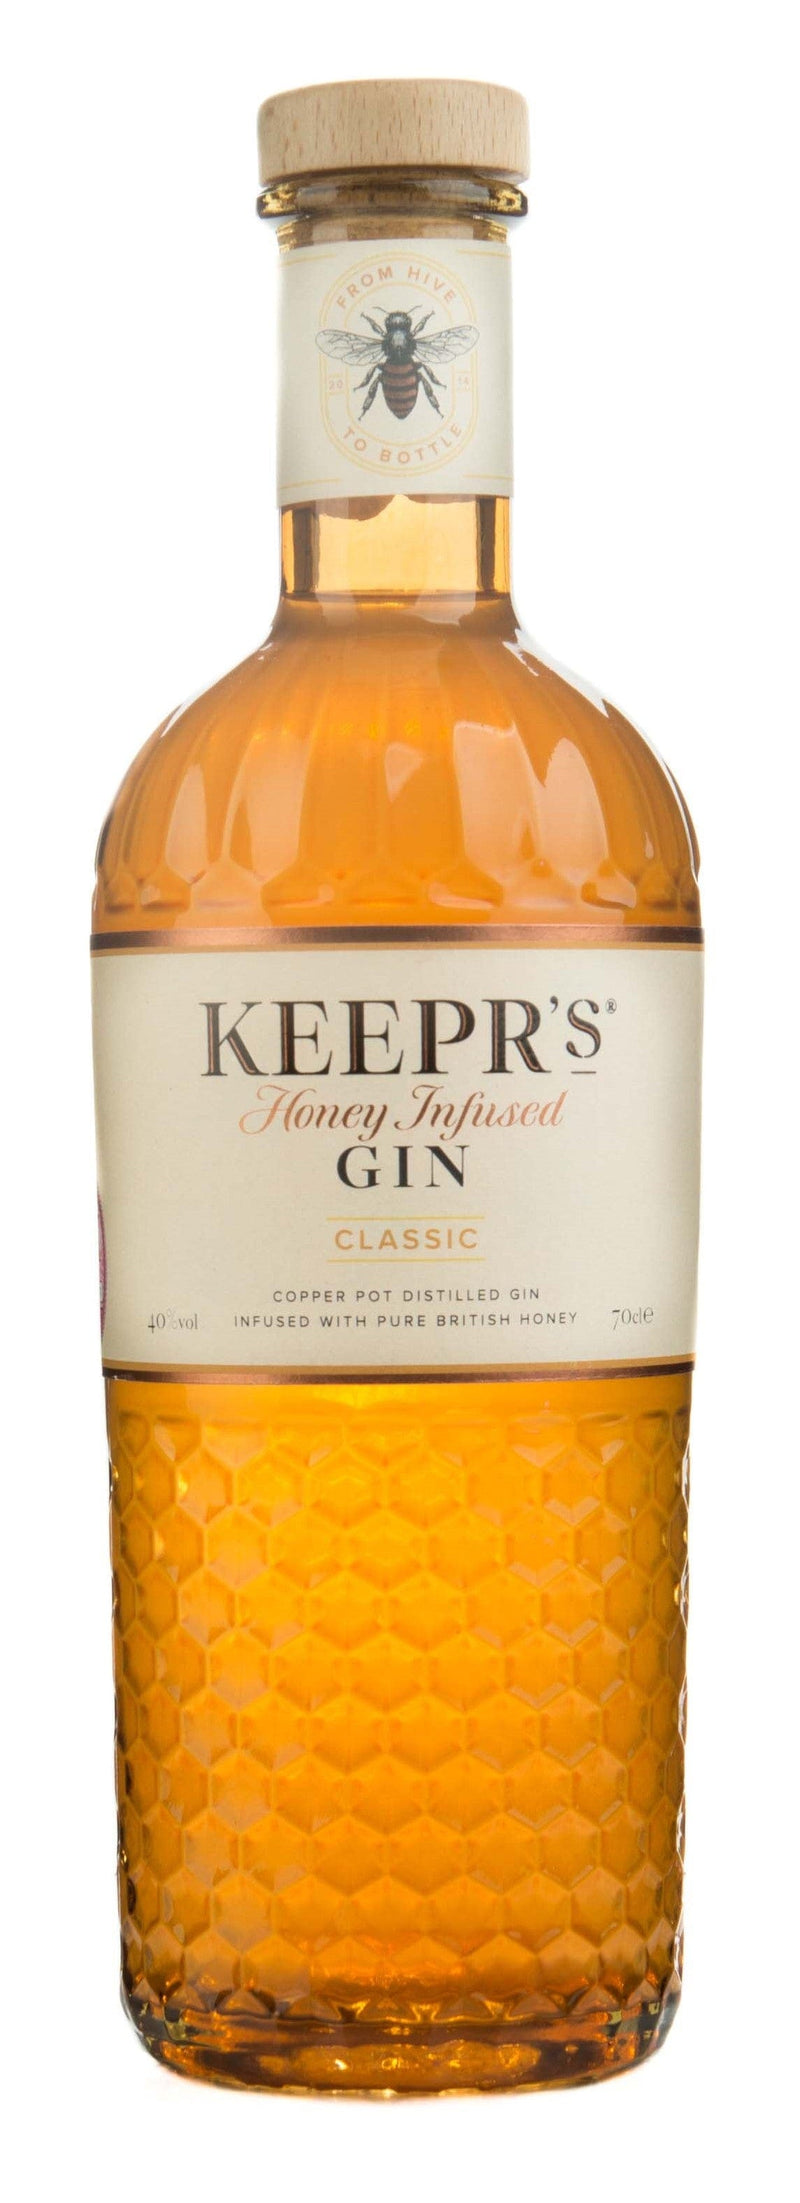 Keepr’s Classic Honey Infused London Dry Gin 70cl